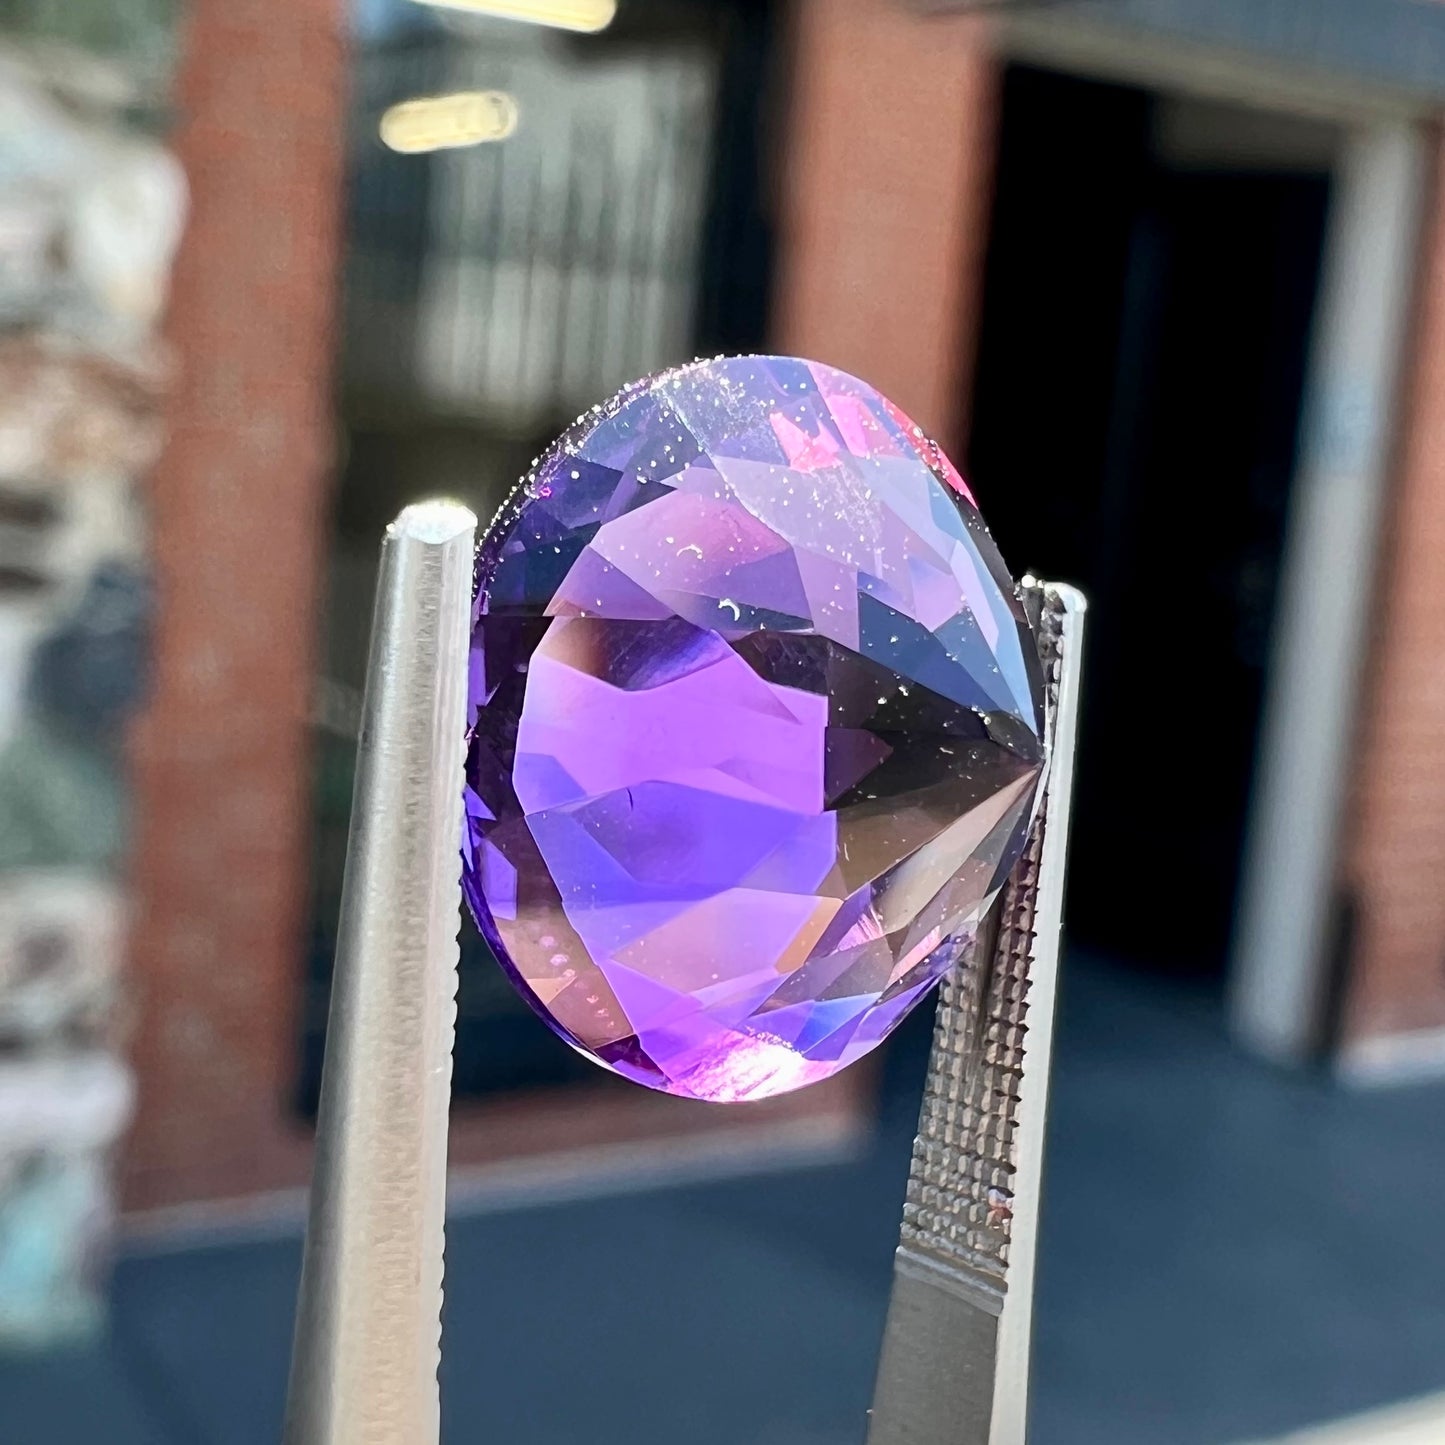 A loose, faceted round brilliant cut amethyst gemstone.  The stone is purple with blue flashes.